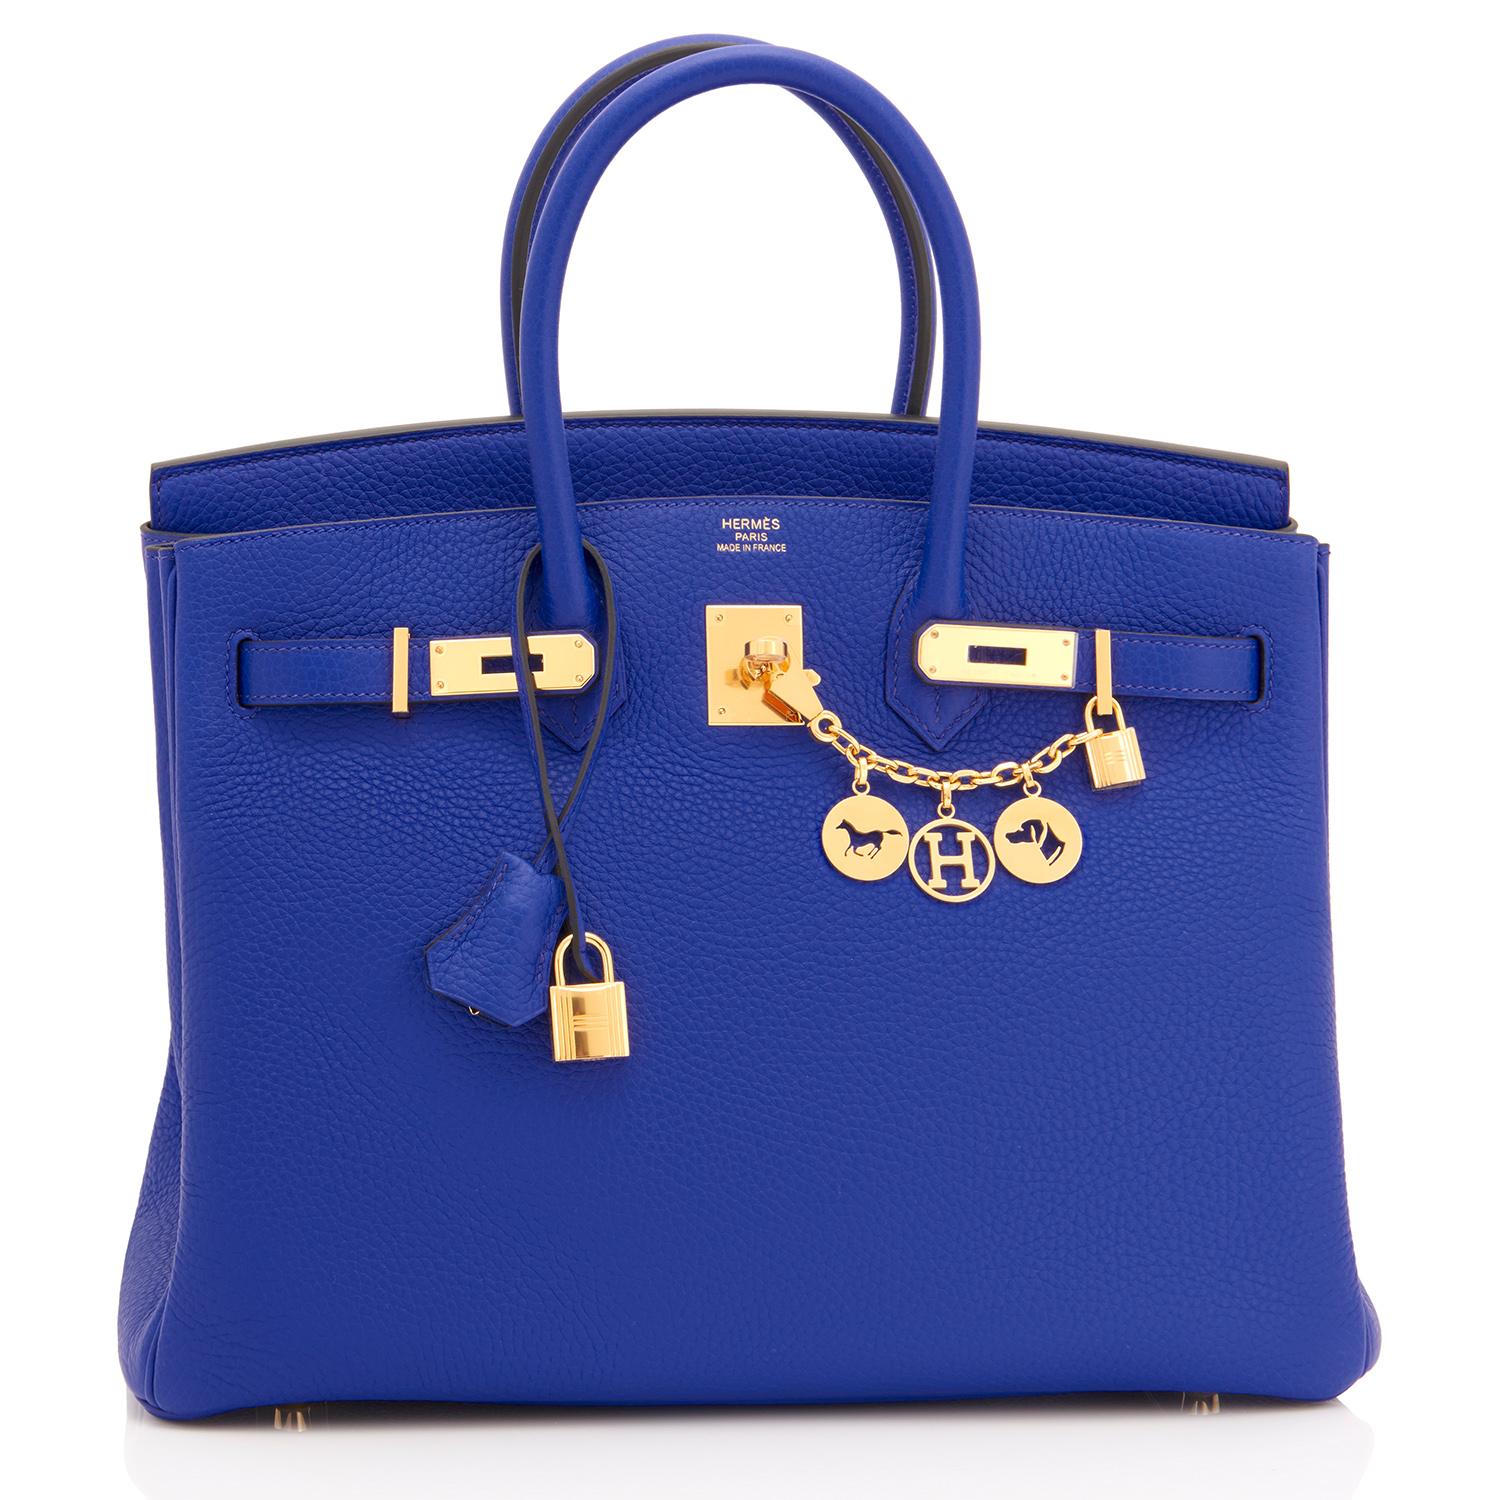 Hermes Blue Electric 35cm Birkin Gold Hardware Electrifying
Brand New in Box in Store Fresh, Pristine Condition (with plastic on hardware)
Perfect Gift! Comes full set with keys, lock, clochette, a sleeper for the bag, rain protector, and orange